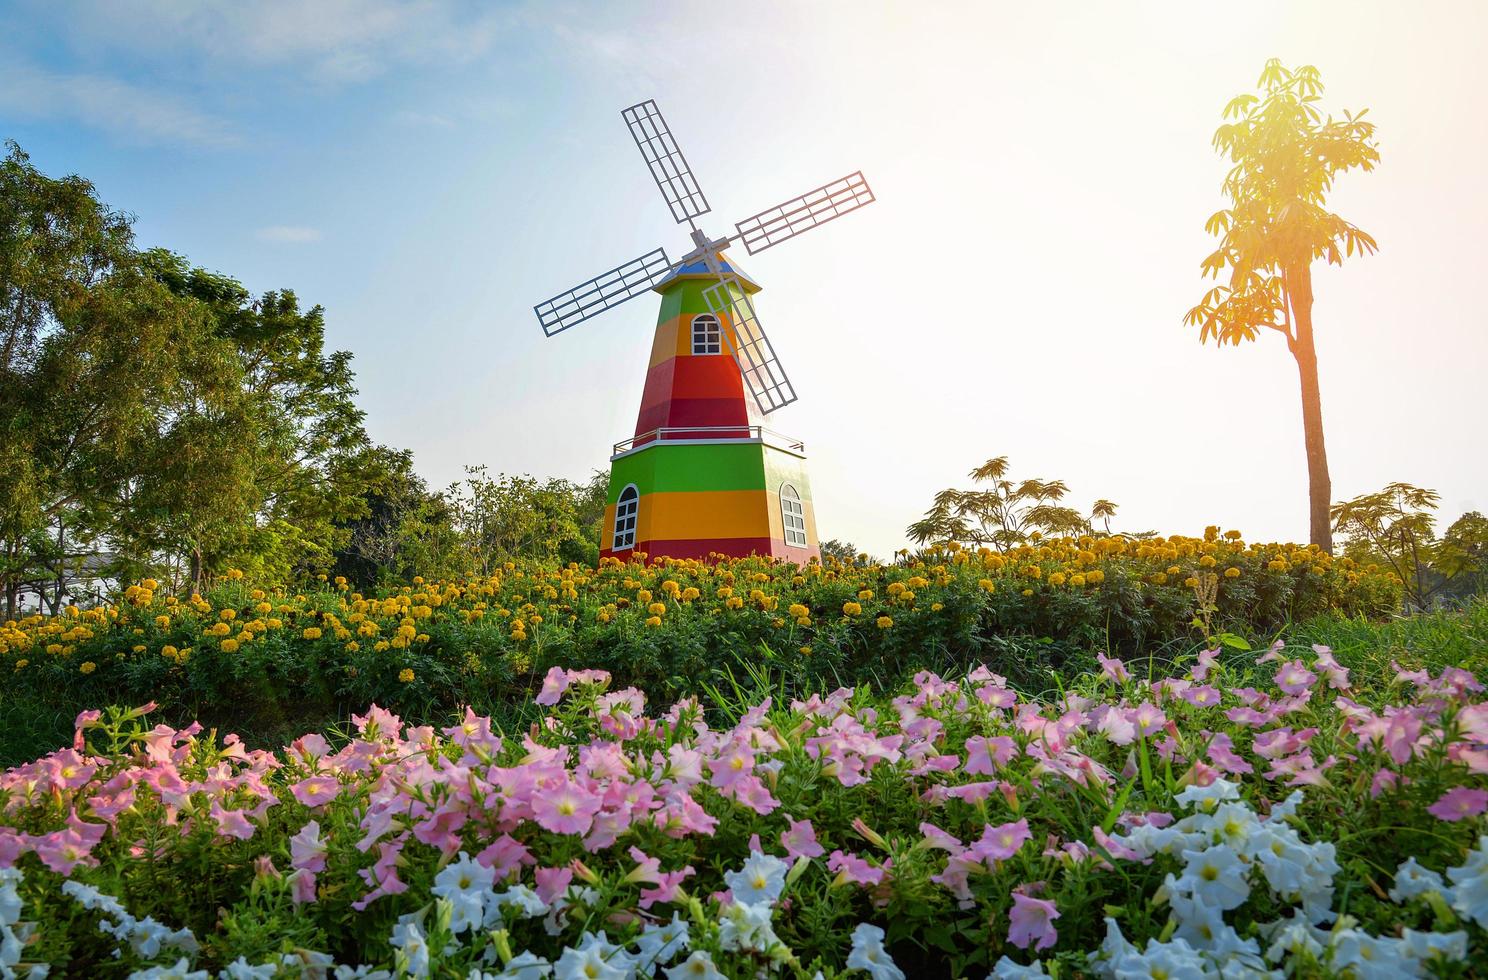 Landscape colorful flower garden and windmill on hill nature in the garden park photo